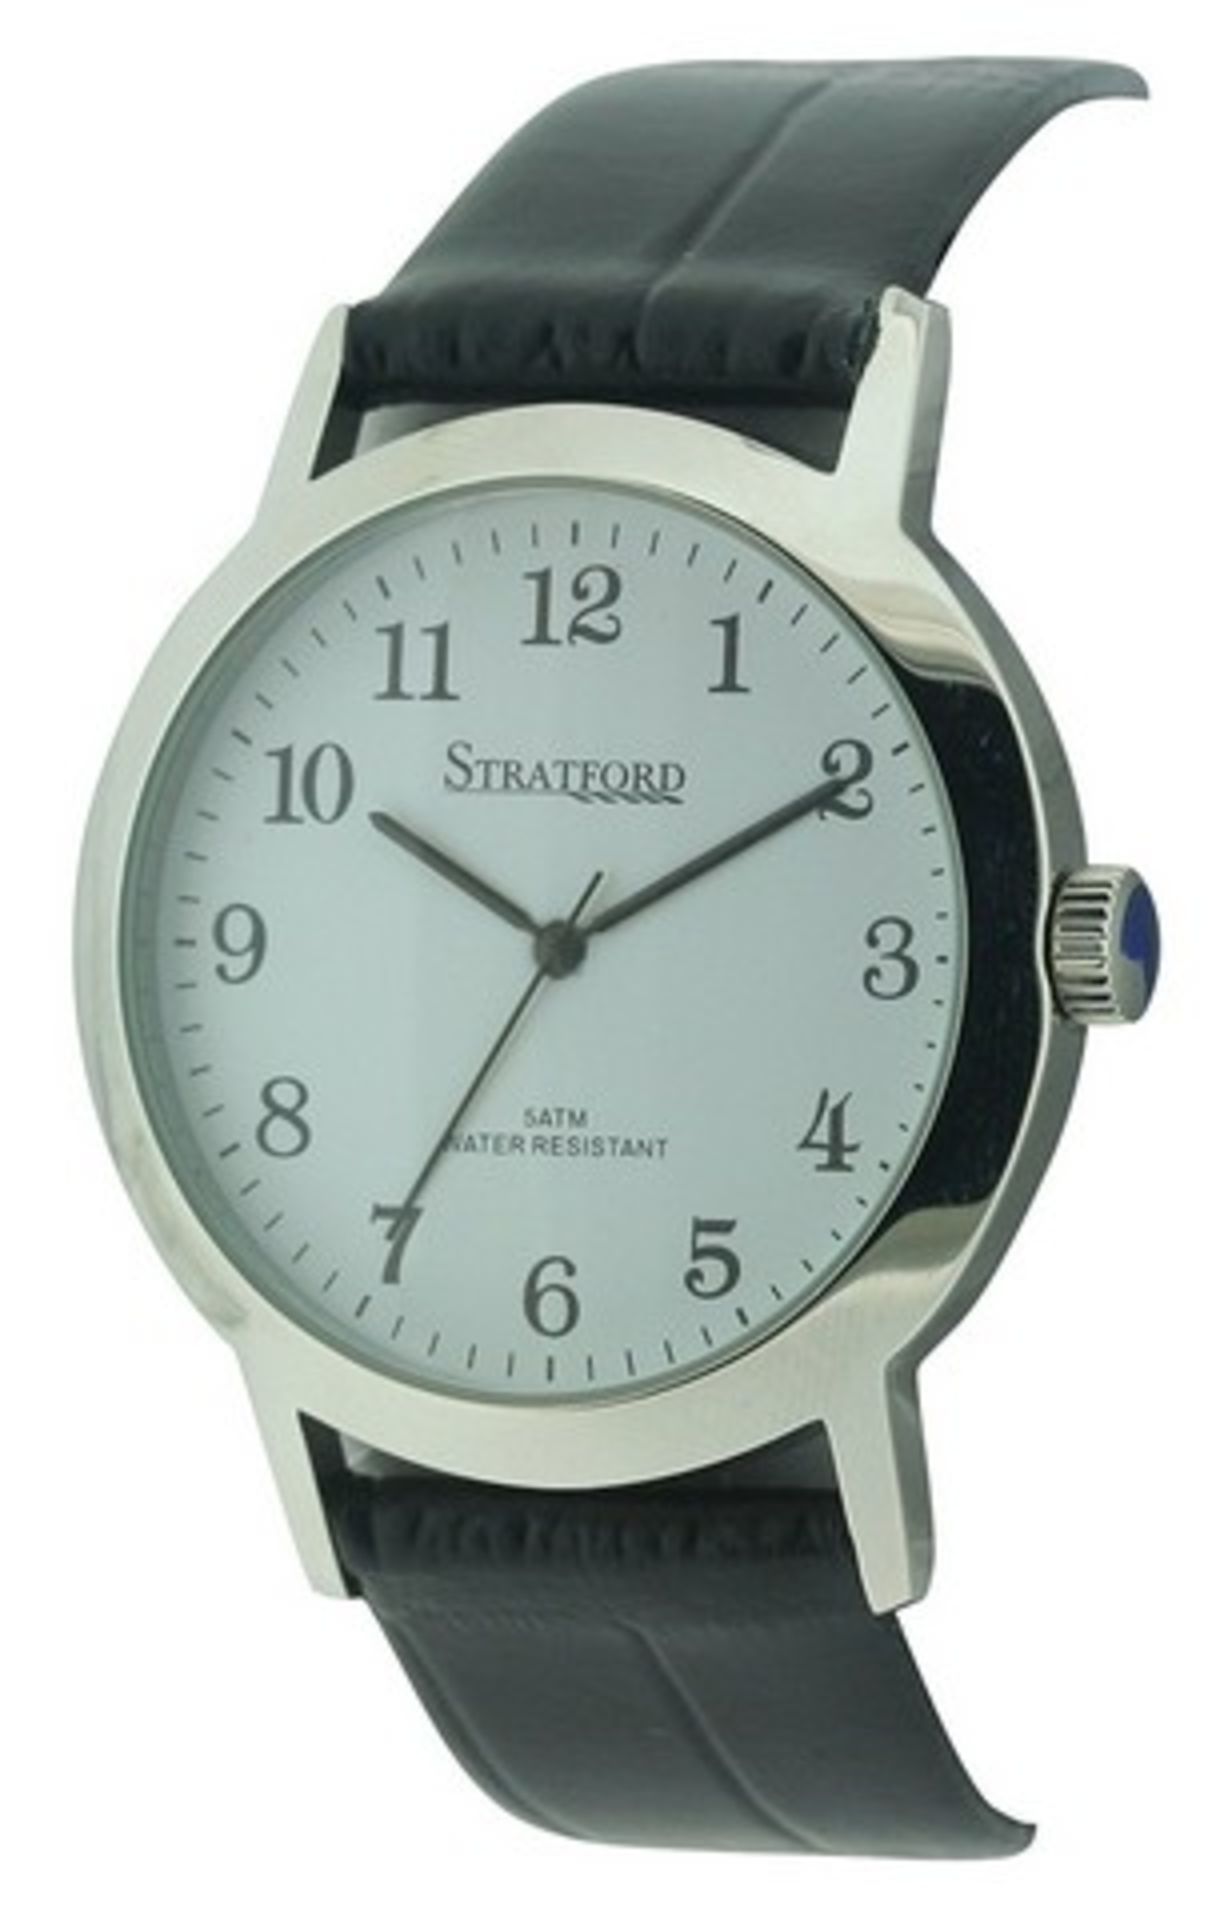 + VAT Brand New Gents Stratford Watch with White Metal Case and Faux Leather Strap - Image is